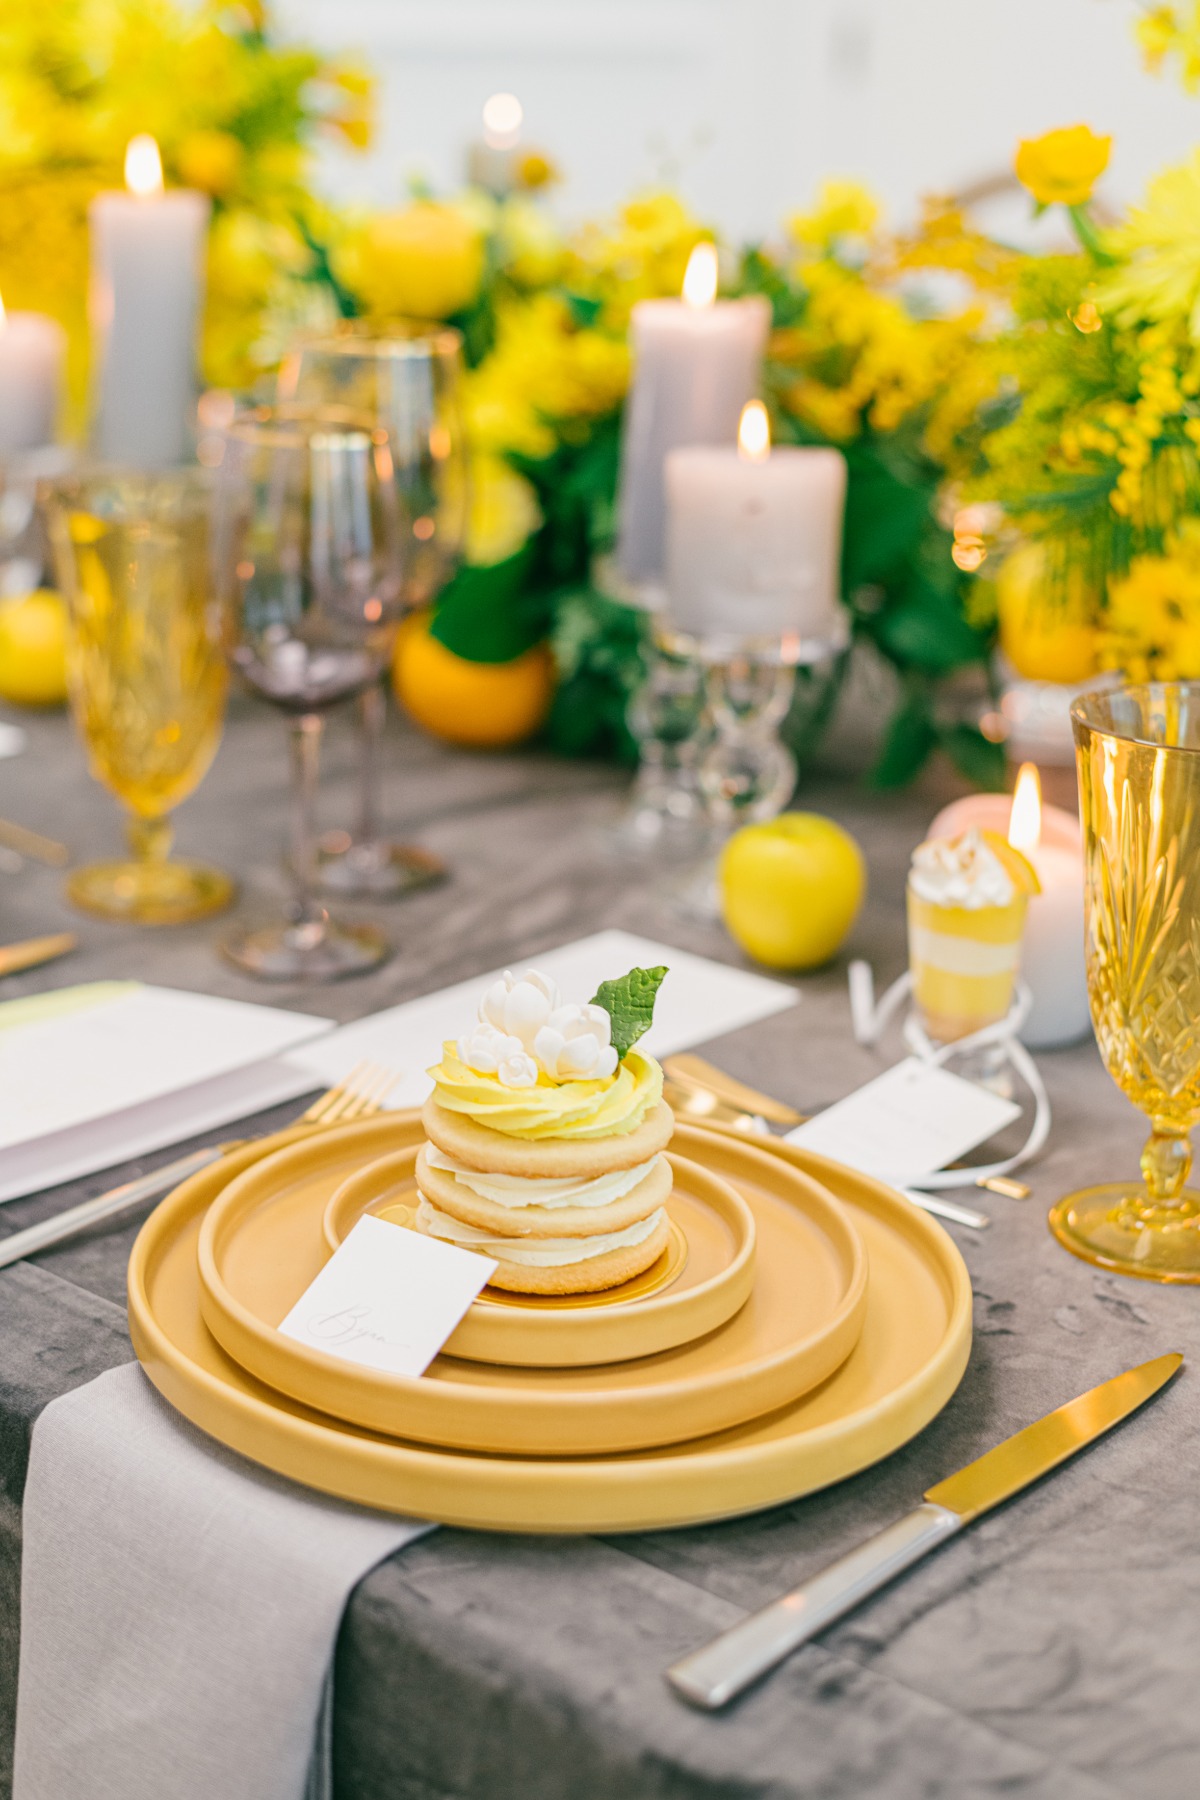 A Delicious Take On How To Incorporate Pantone's Color(s) Of The Year Into Your Wedding